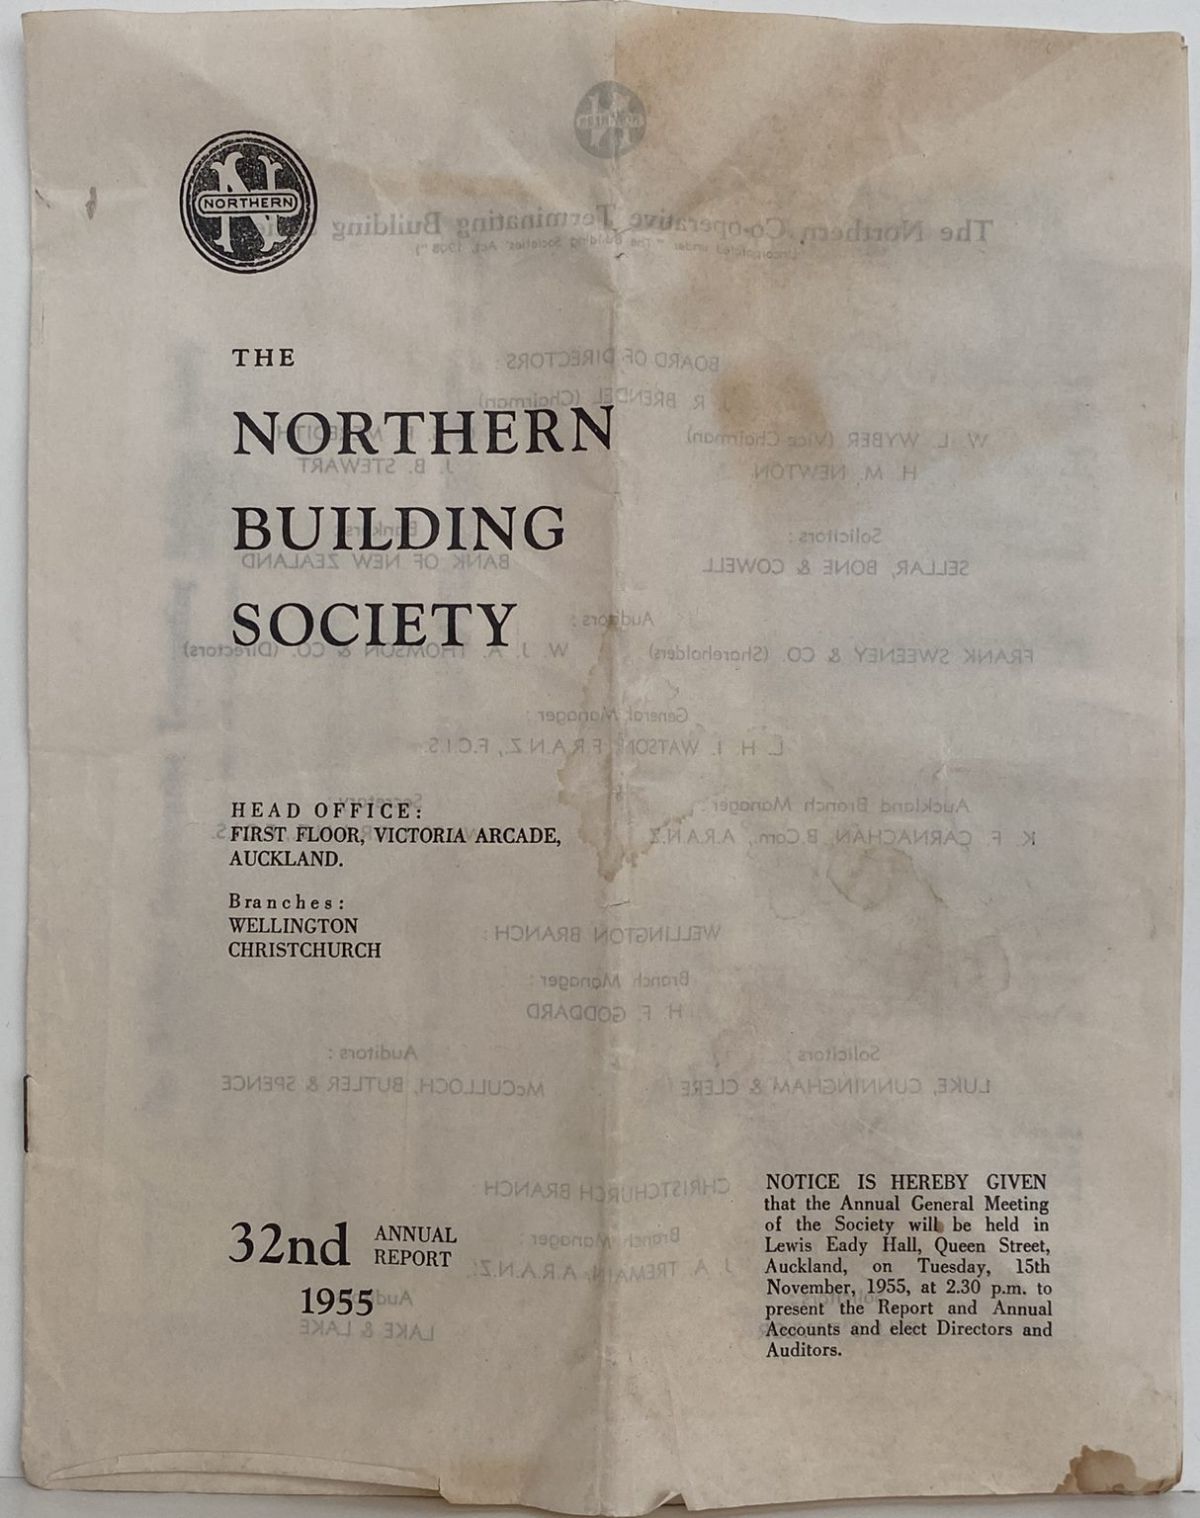 ANNUAL REPORT: The Northern Building Society 1955